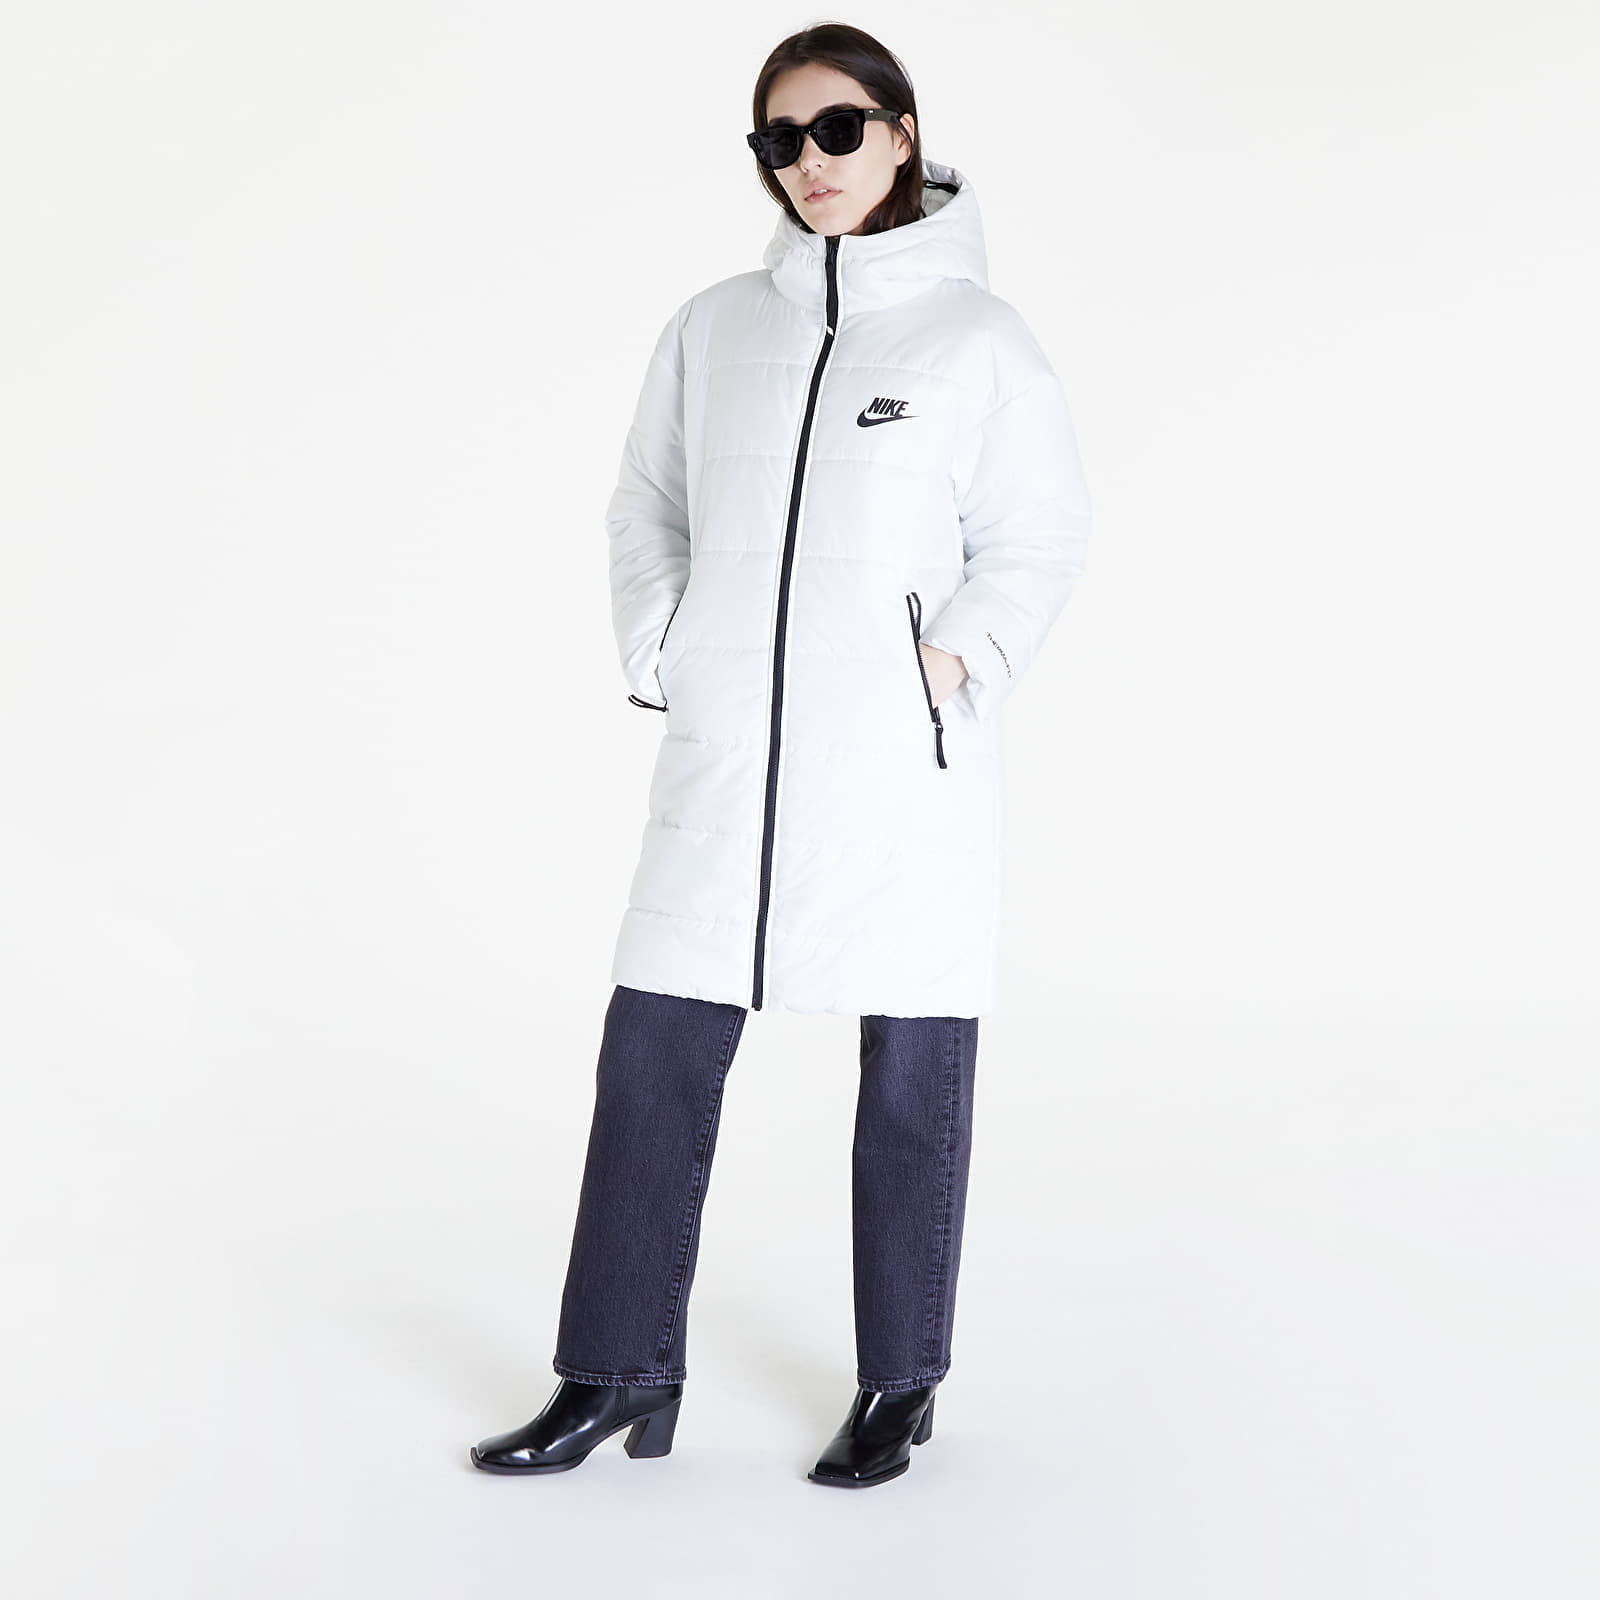 Repel White | Queens Jacket Coats and Nike Jackets Therma-FIT